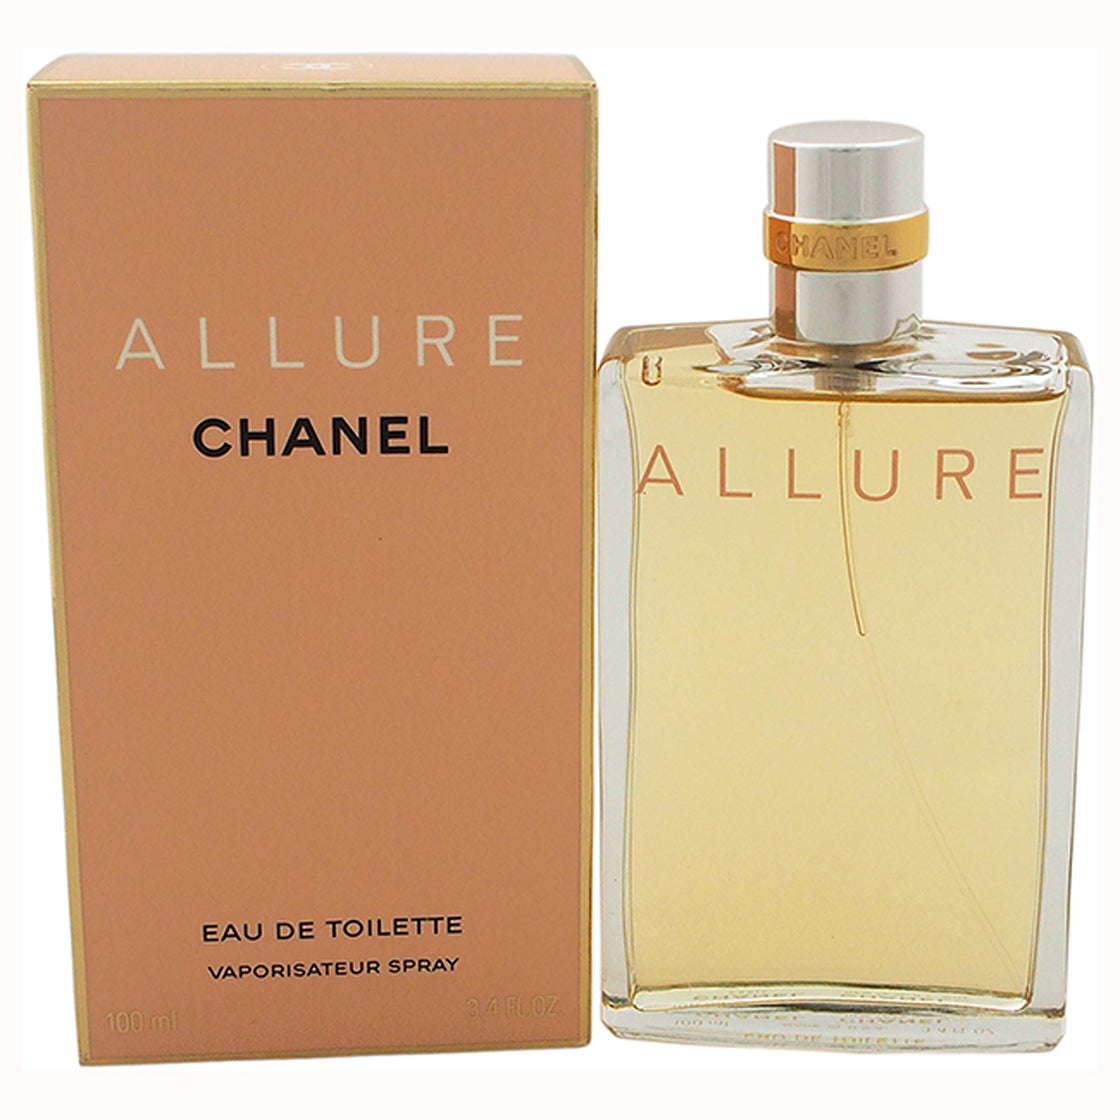 Allure by Chanel for Women - 3.4 oz EDT Spray